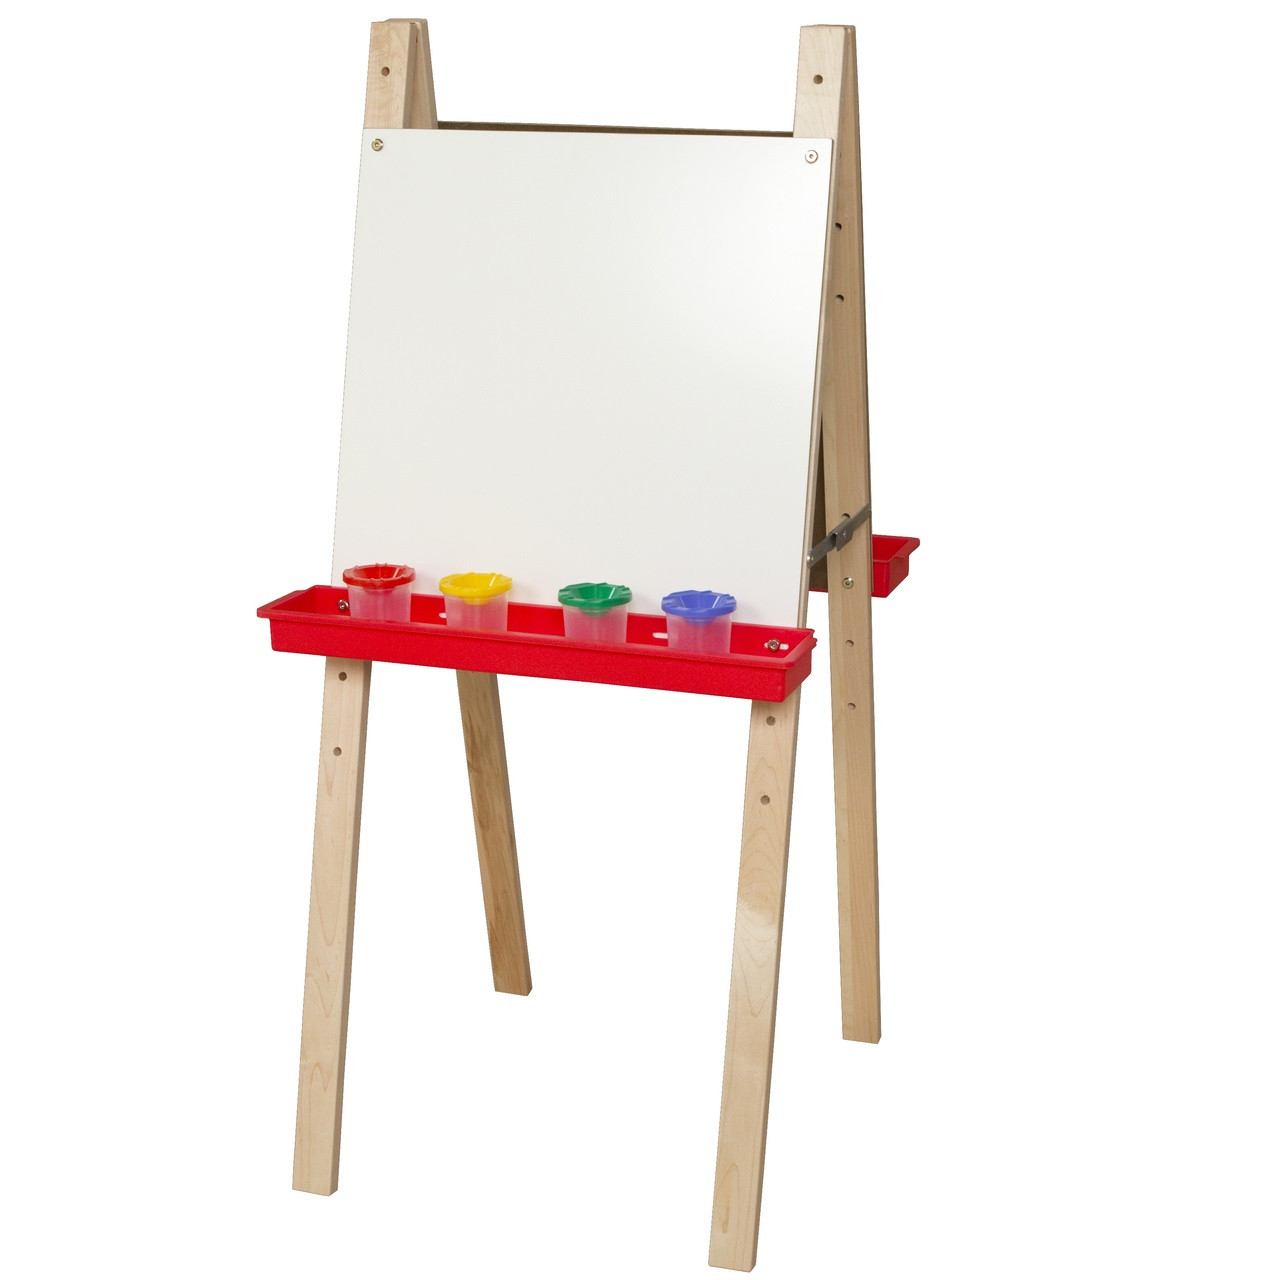 Wood Designs Double Adjustable Easel with Markerboard